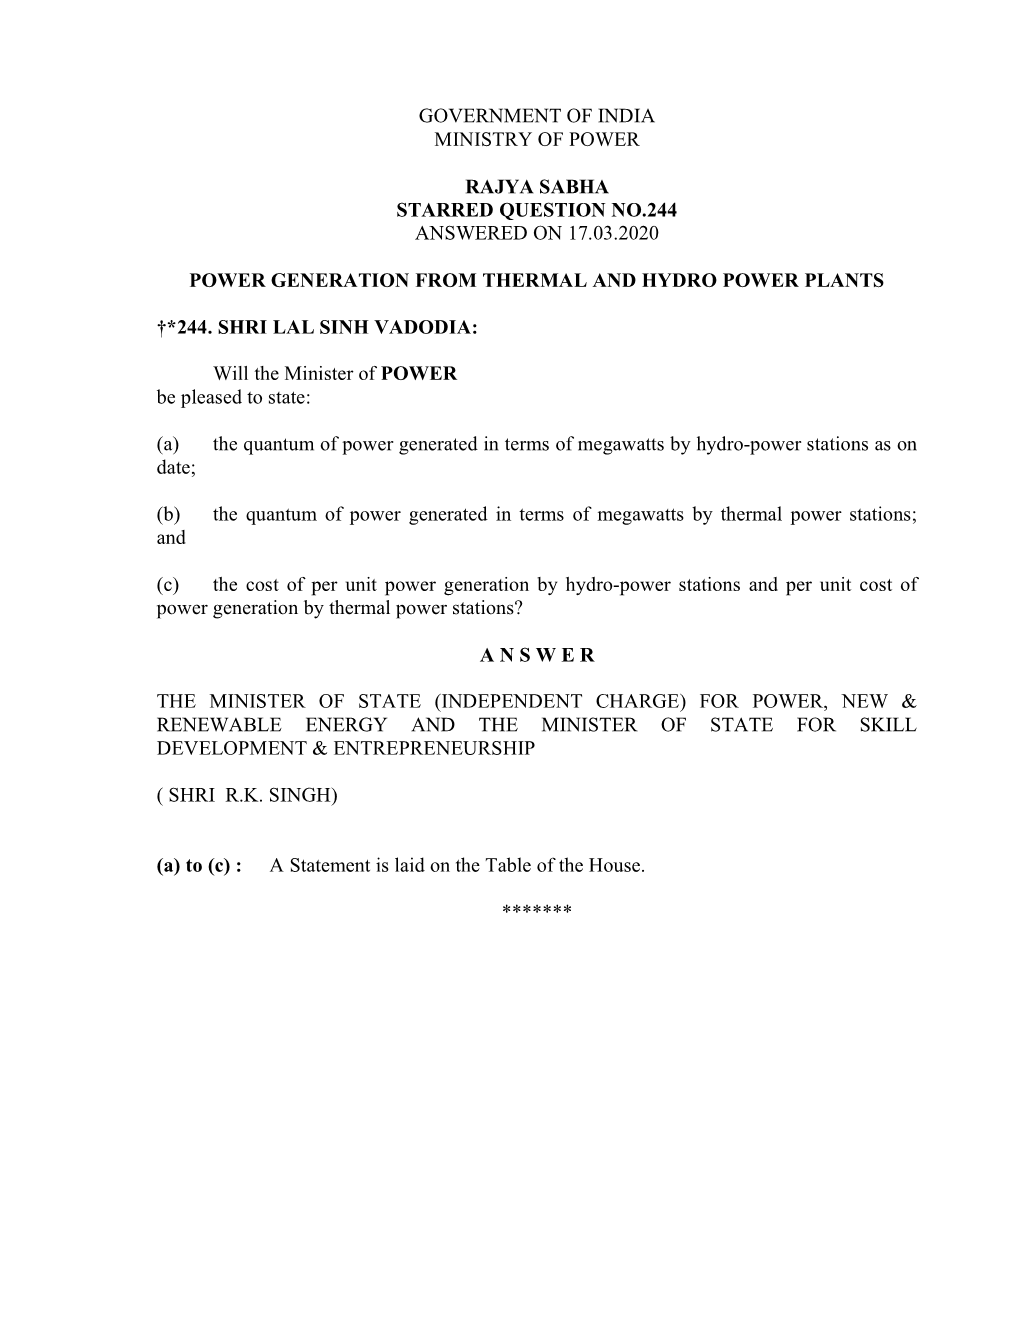 Government of India Ministry of Power Rajya Sabha Unstarred Question No.2704 Answered on 17.03.2020